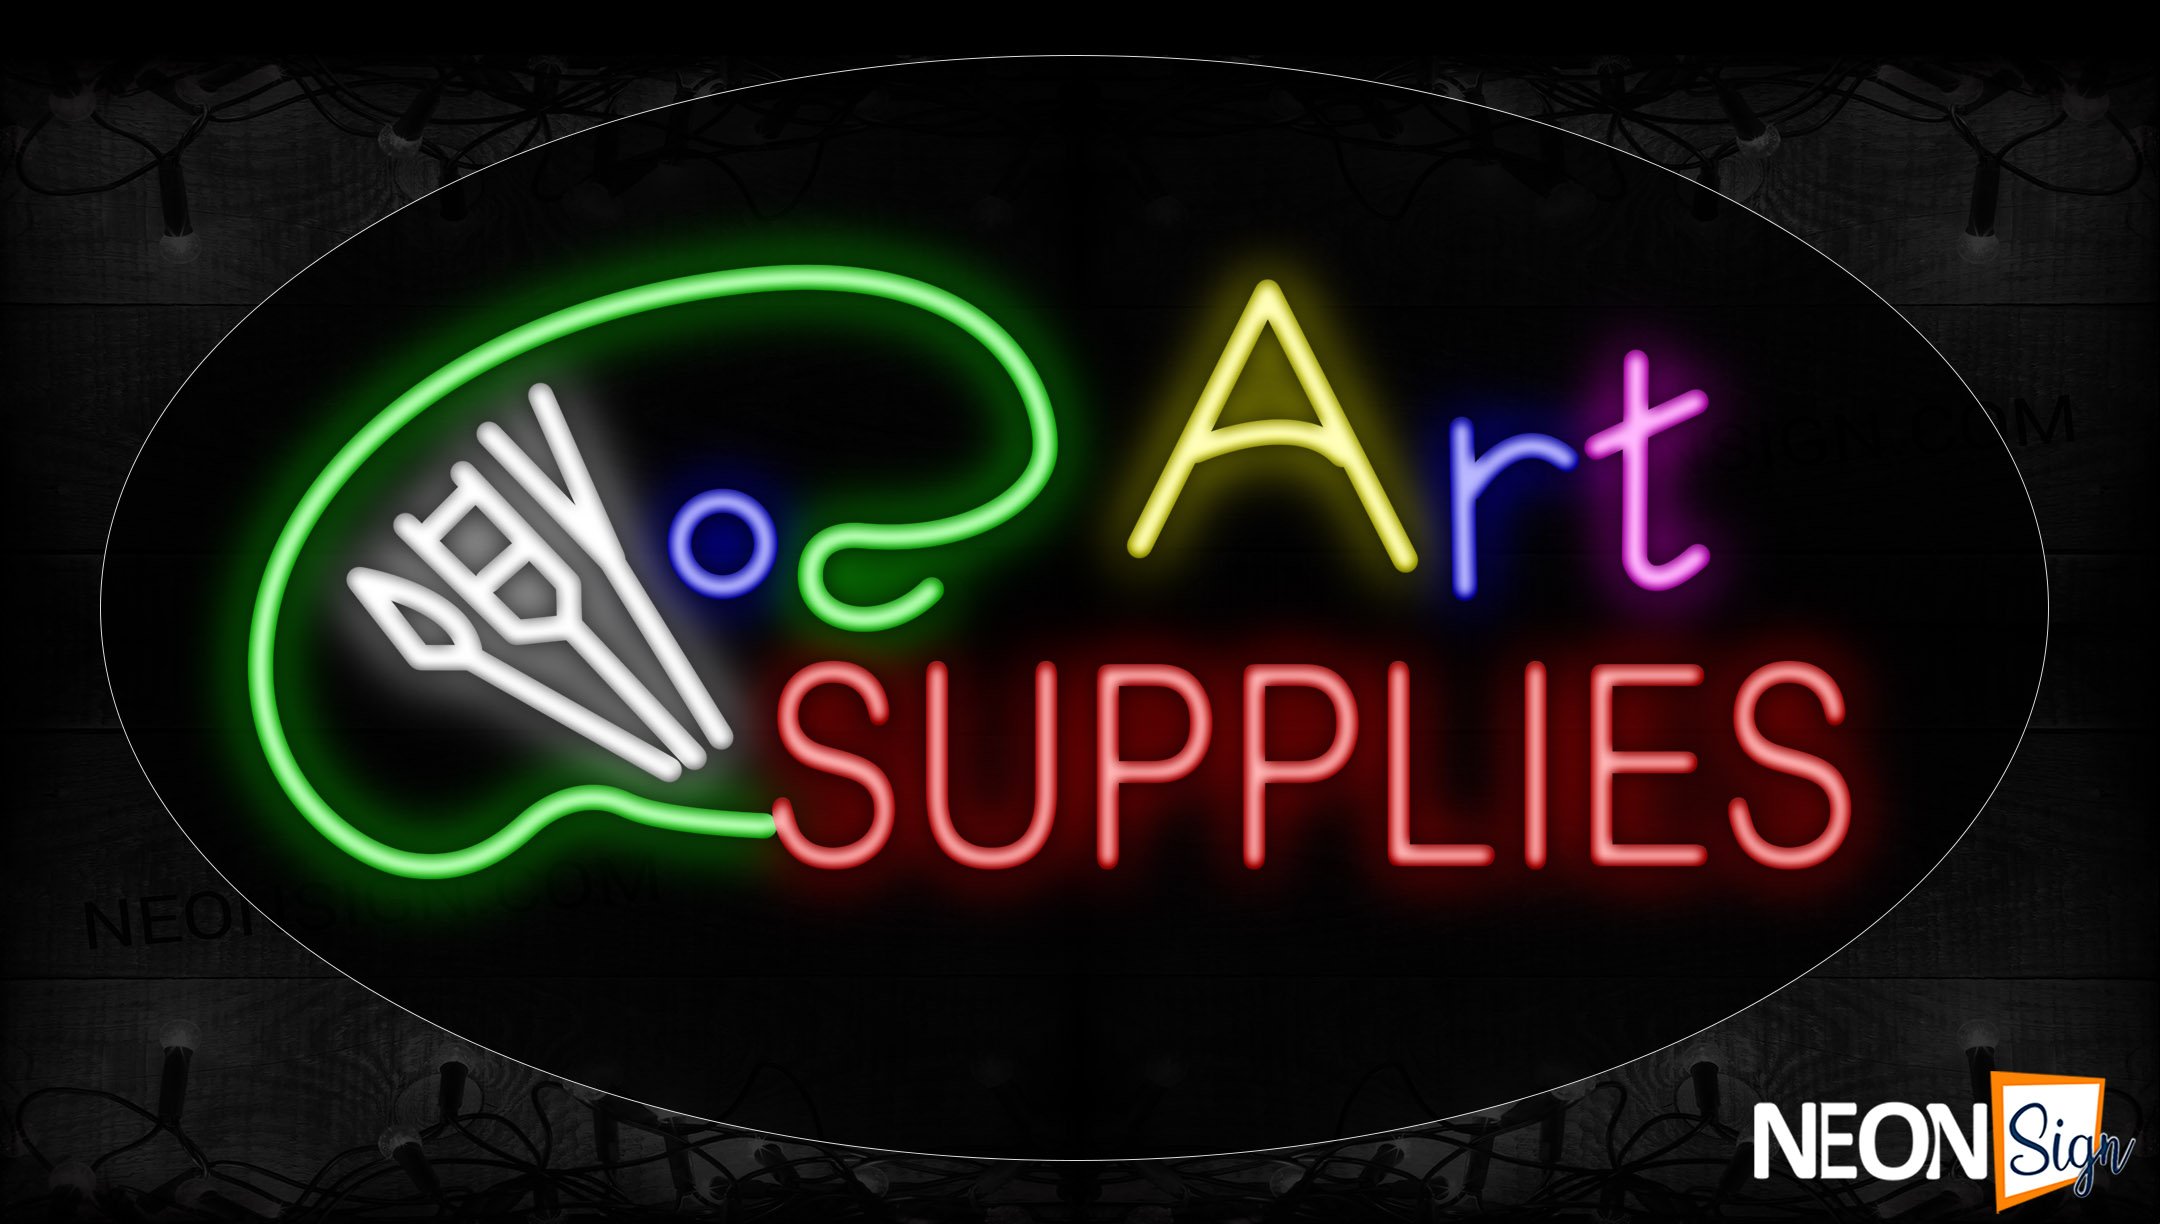 Image of 14380 Art Supplies with logo Neon Signs_17x30 Contoured Black Backing